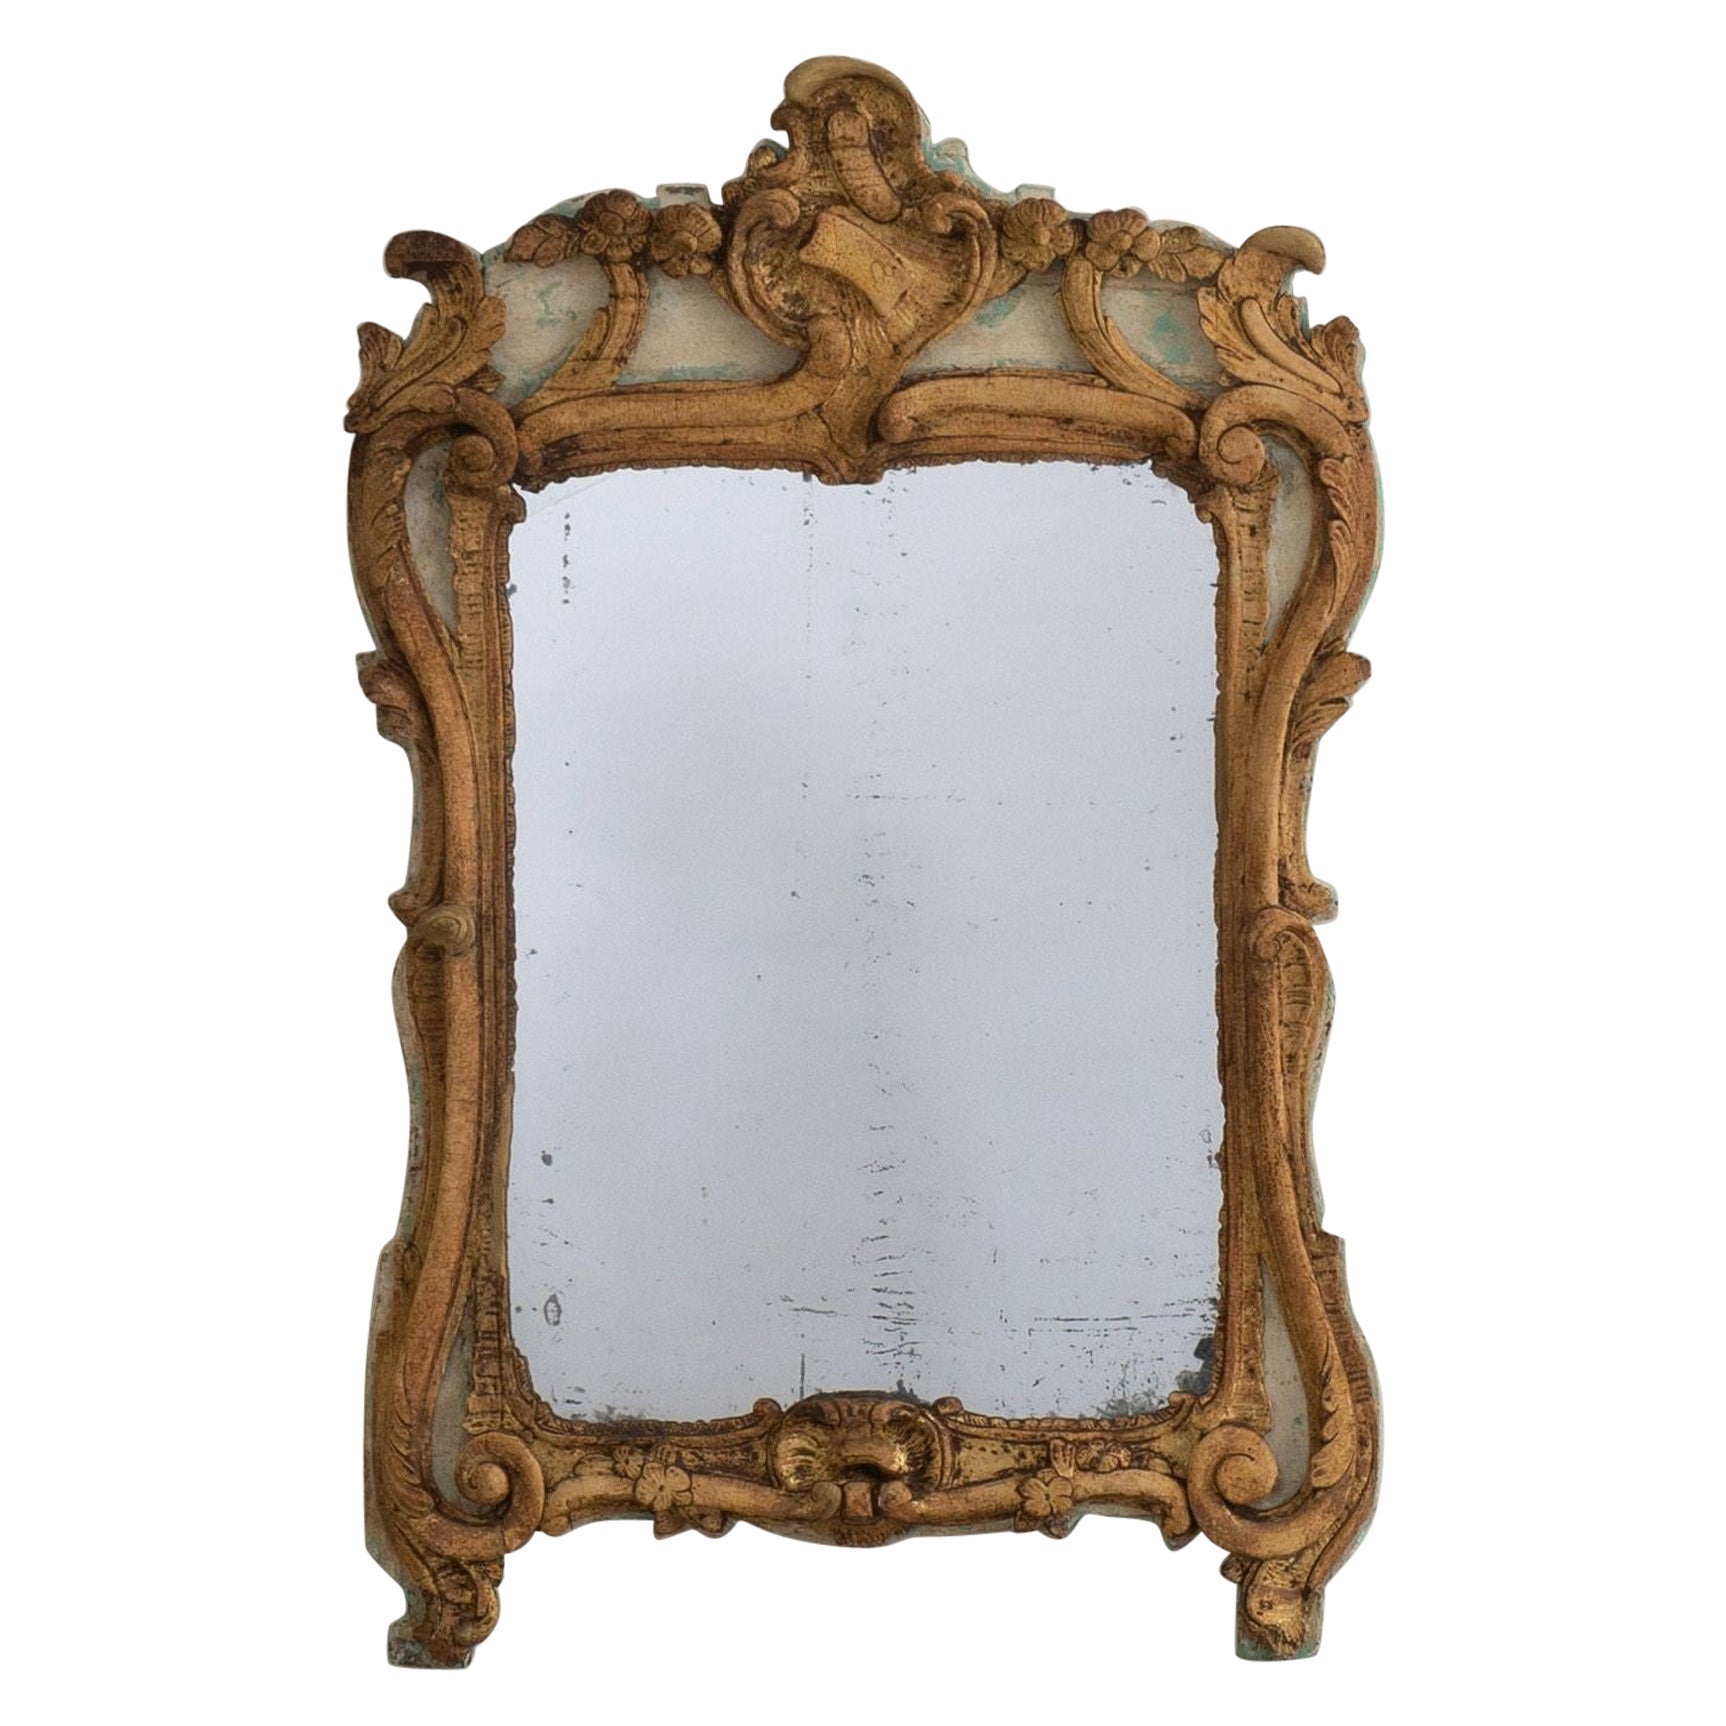 18th c. French Louis XV Period Giltwood Mirror with Original Mirror Plate